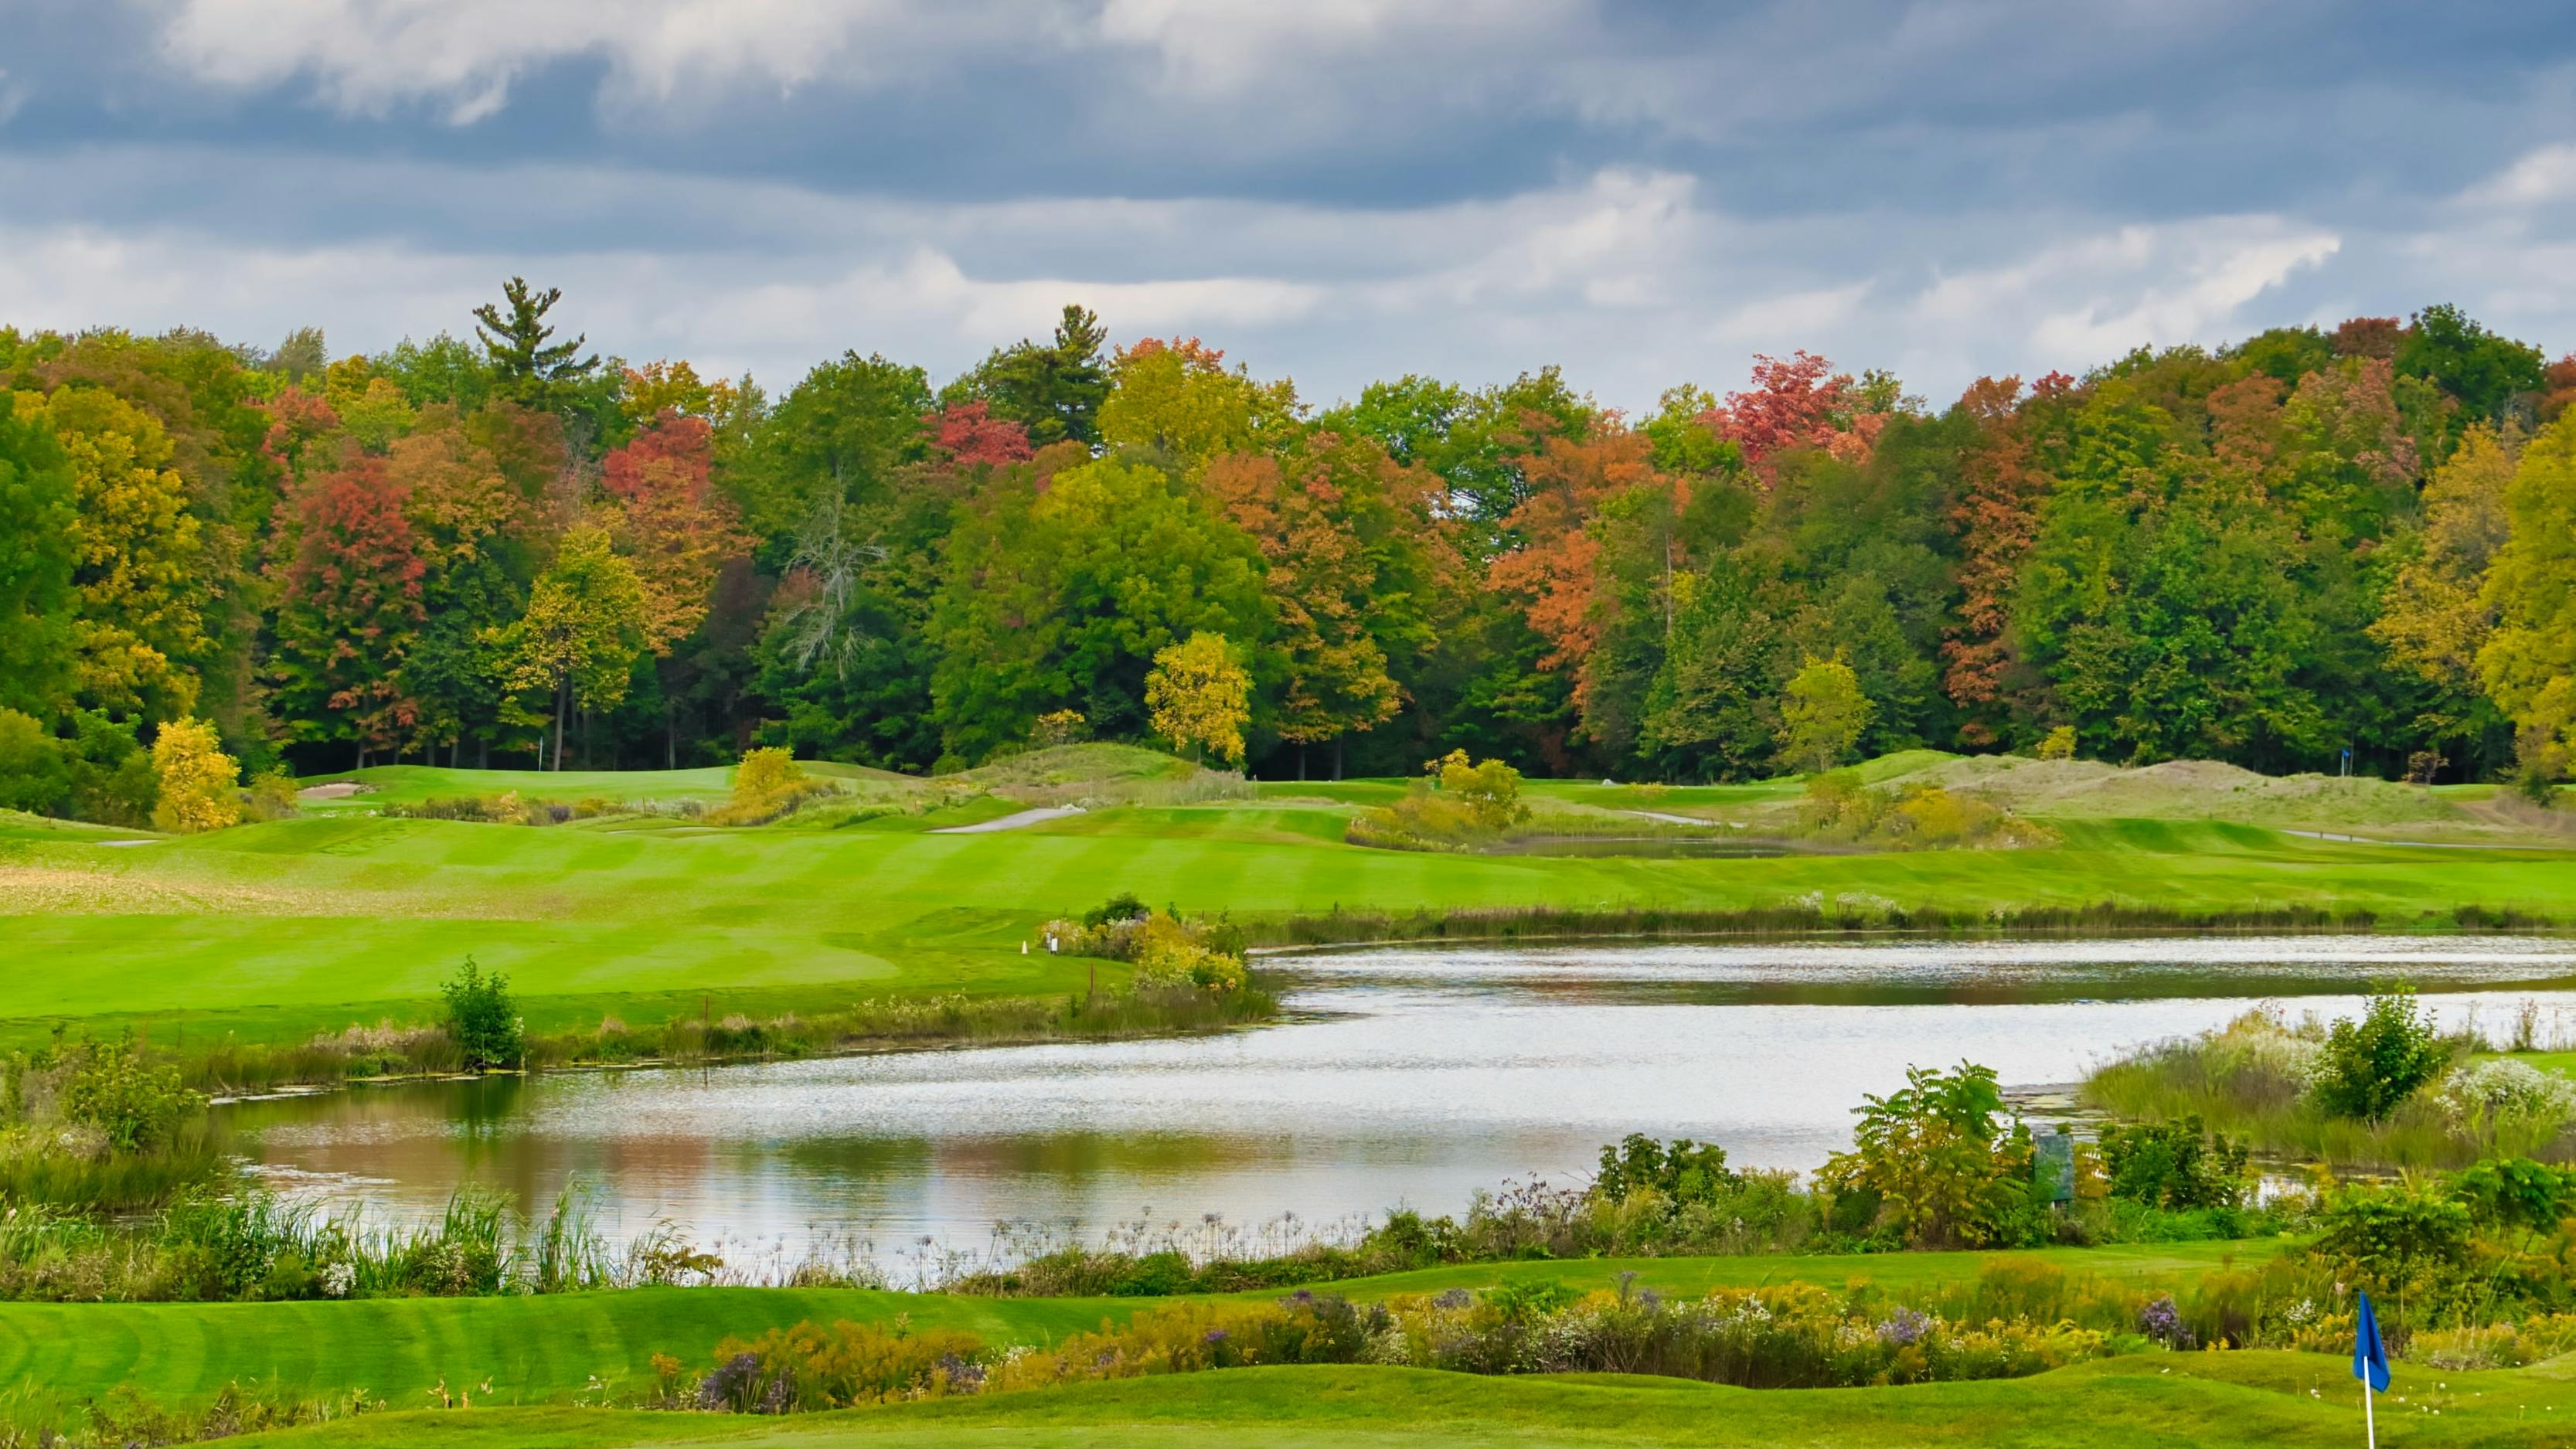 A landscape of a golf course in the autumn with the trees rimming the course turning colors. 